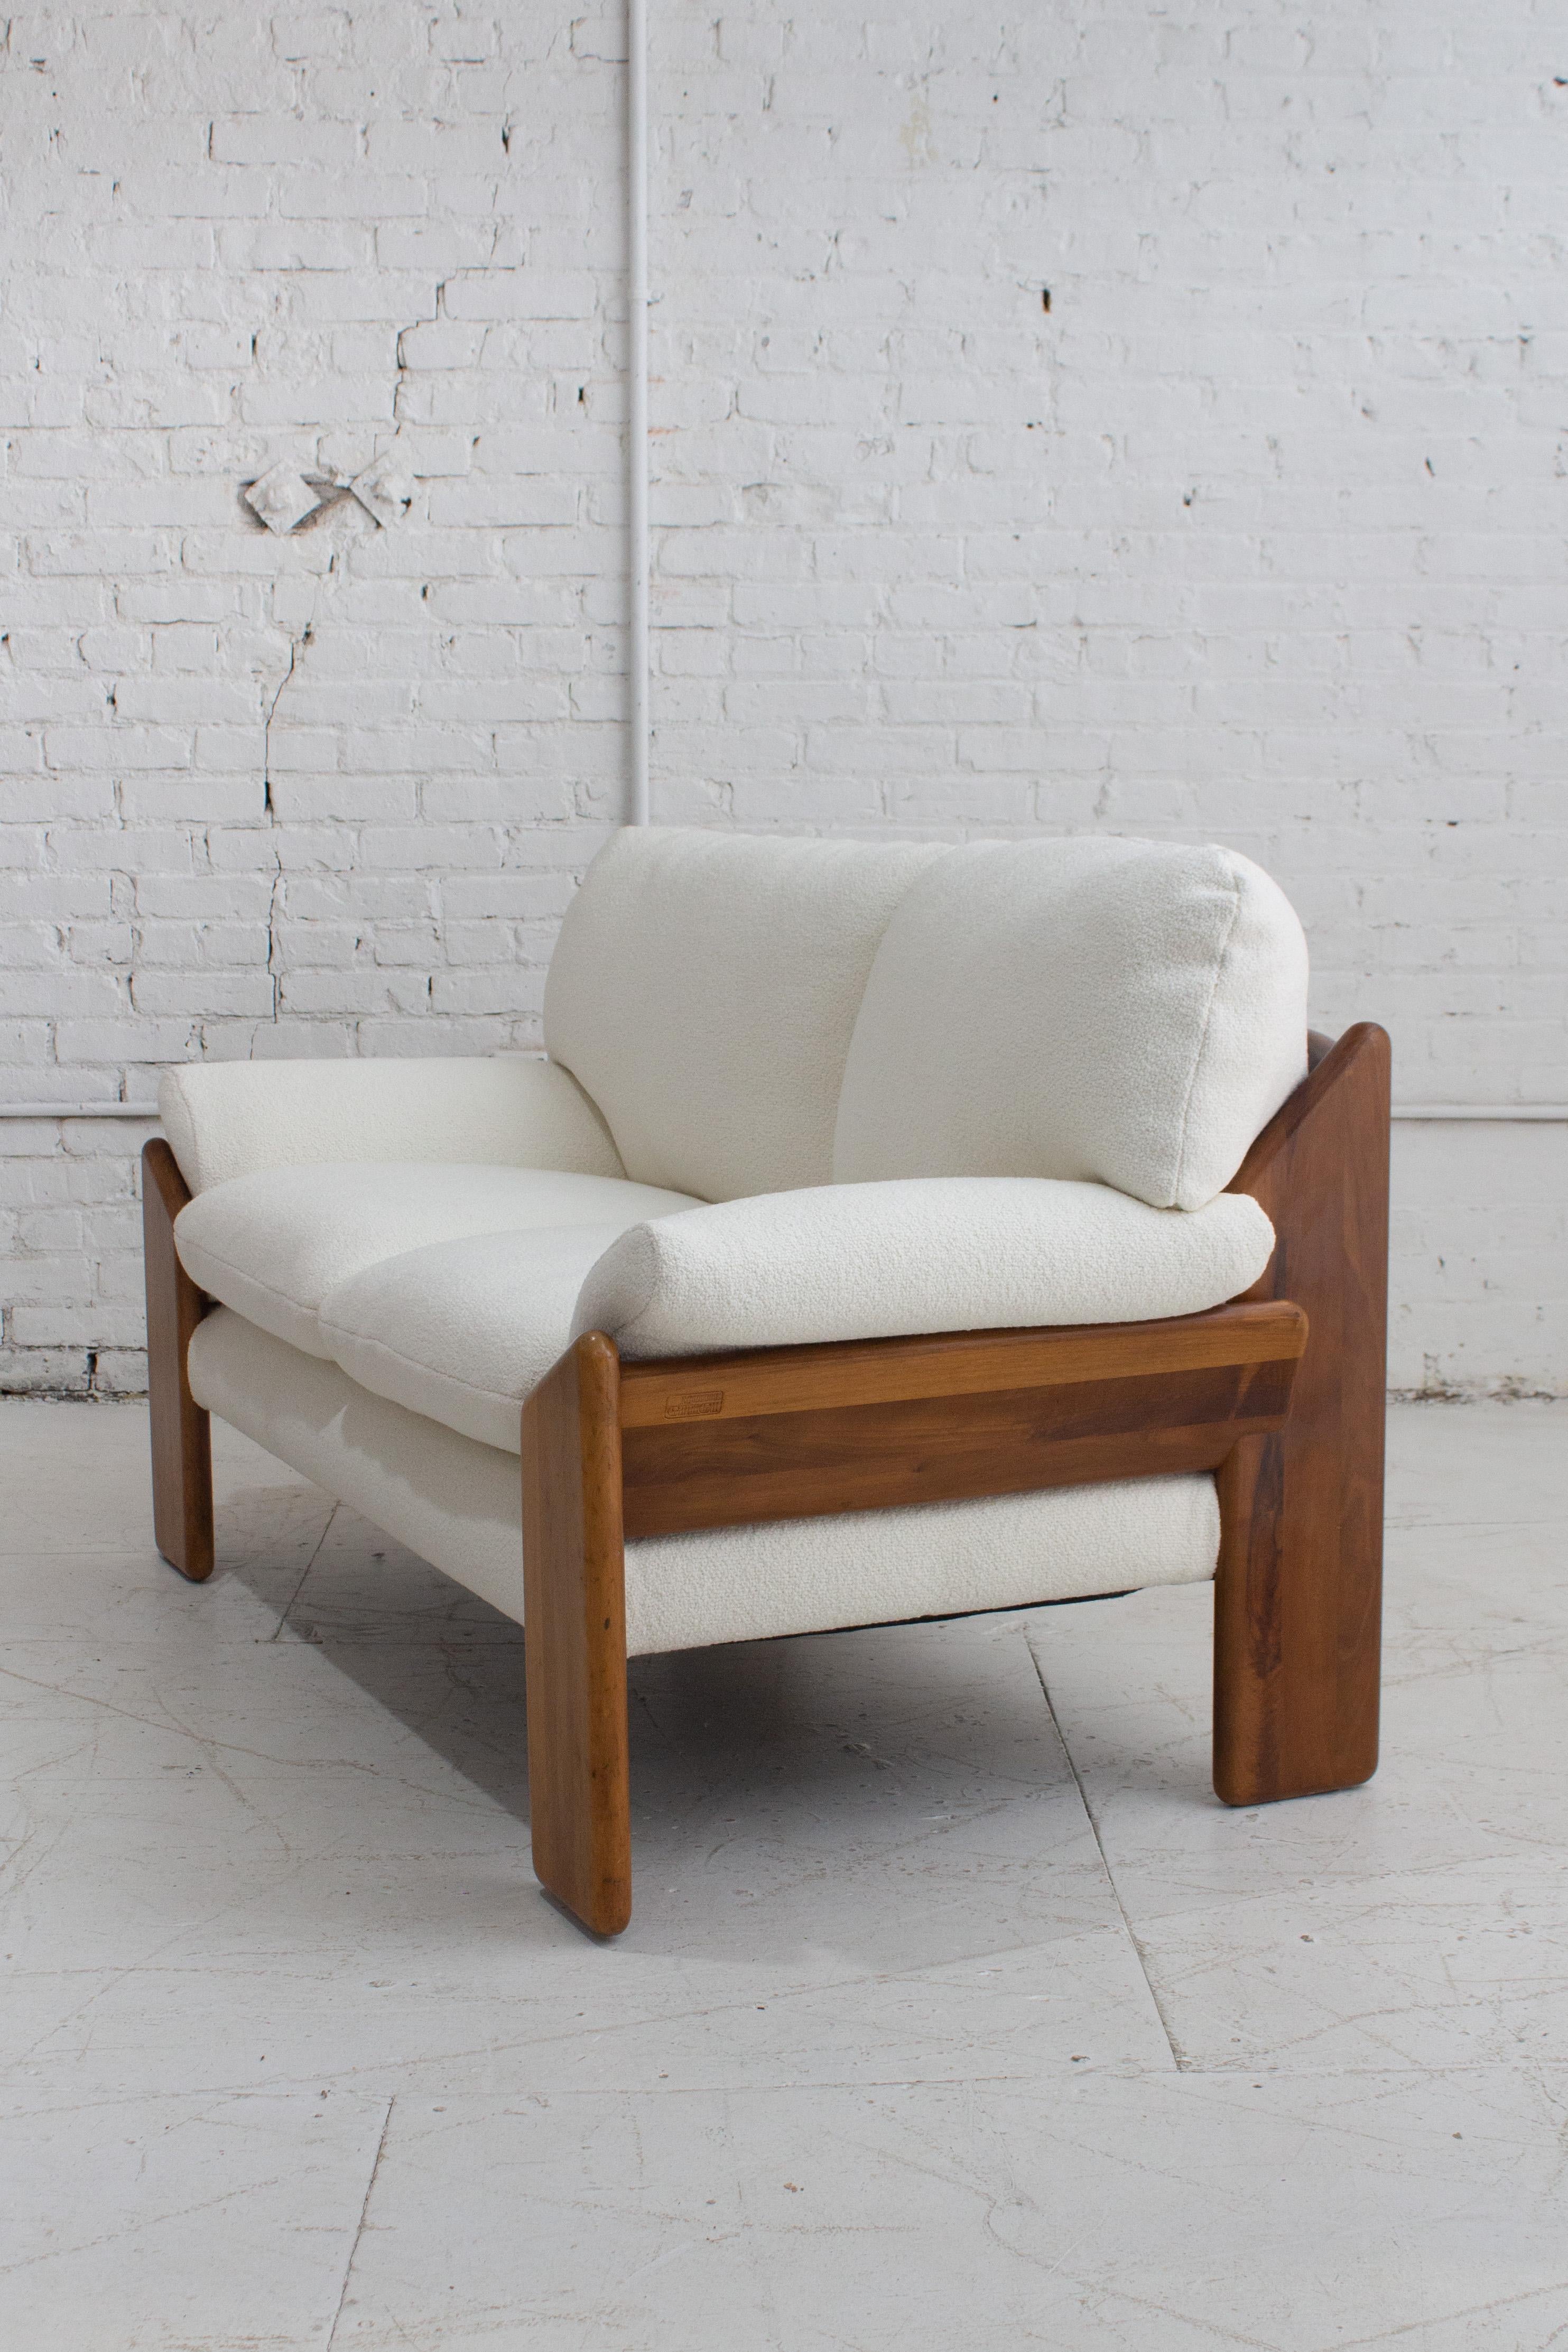 Upholstery 'Sapporo' Wood Frame Two Seat Sofa by Mario Marenco for Mobil Girgi For Sale